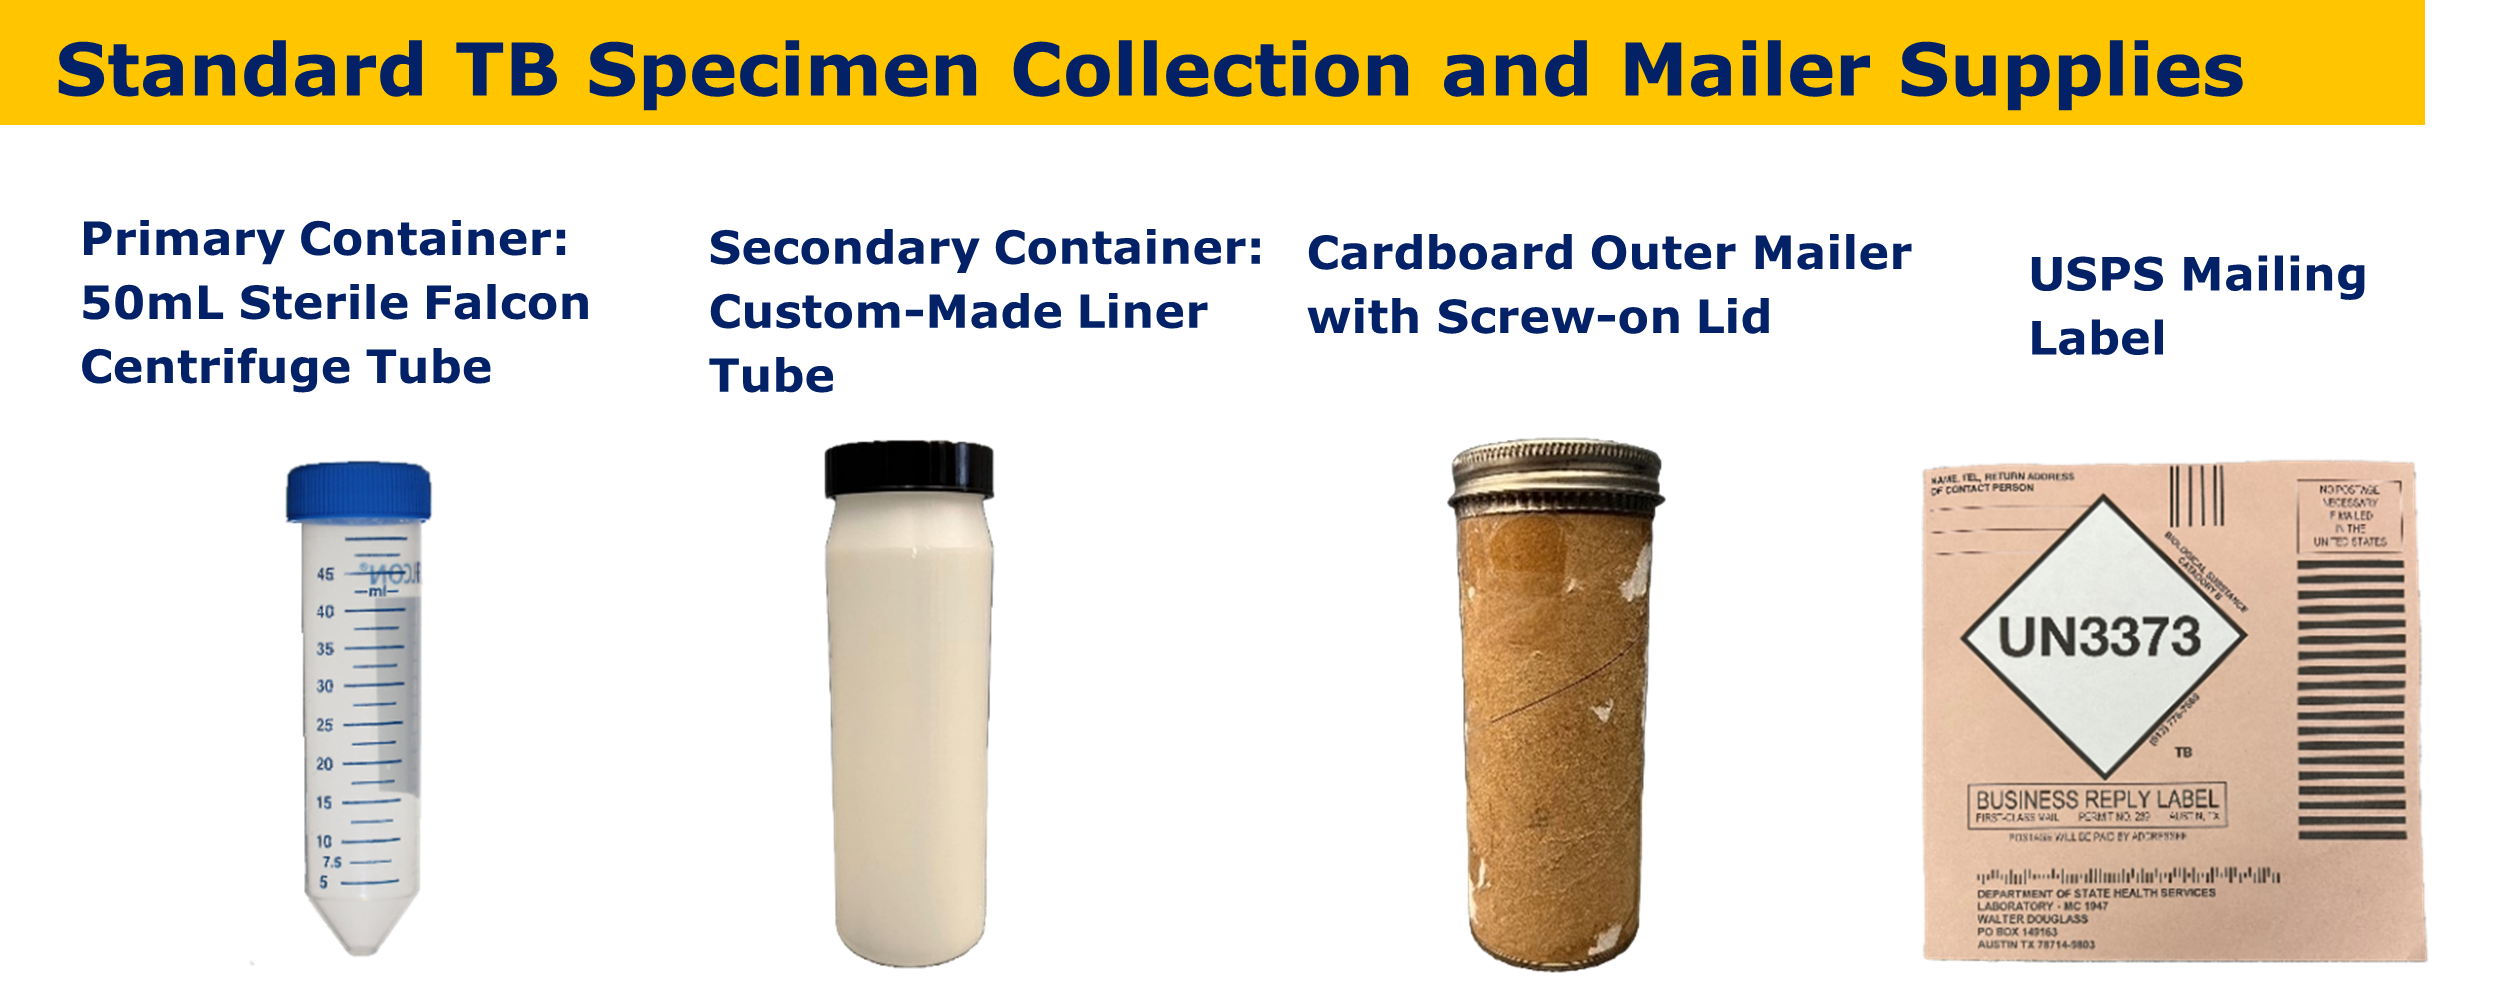 "Four TB specimen collection supplies that can be ordered are shown:  A transparent, plastic conical tube with a blue lid, a white, plastic, cylindrical container with a black lid, a cylindrical, cardboard container with a metal lid, and a postage paid mailing label with a prominent UN3373 label on it. "